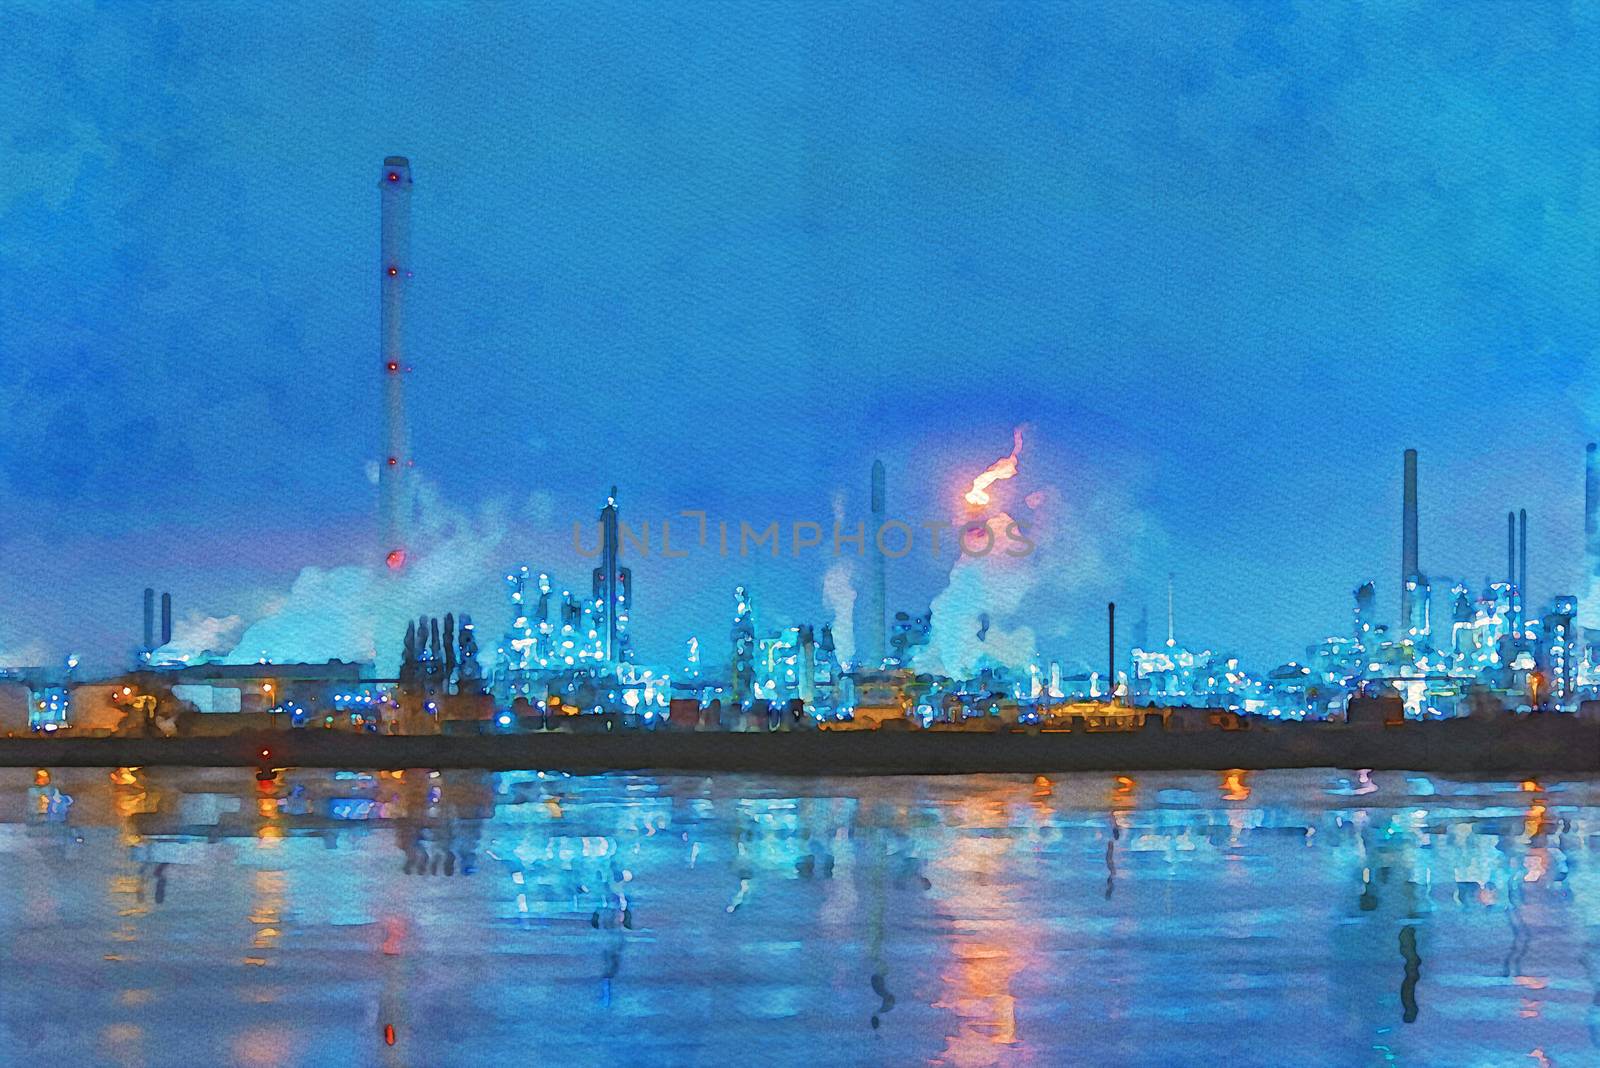 Digital watercolor painting of the refineries reflection and its chimney during the on fire sunset golden hour moment at Rotterdam, Netherlands